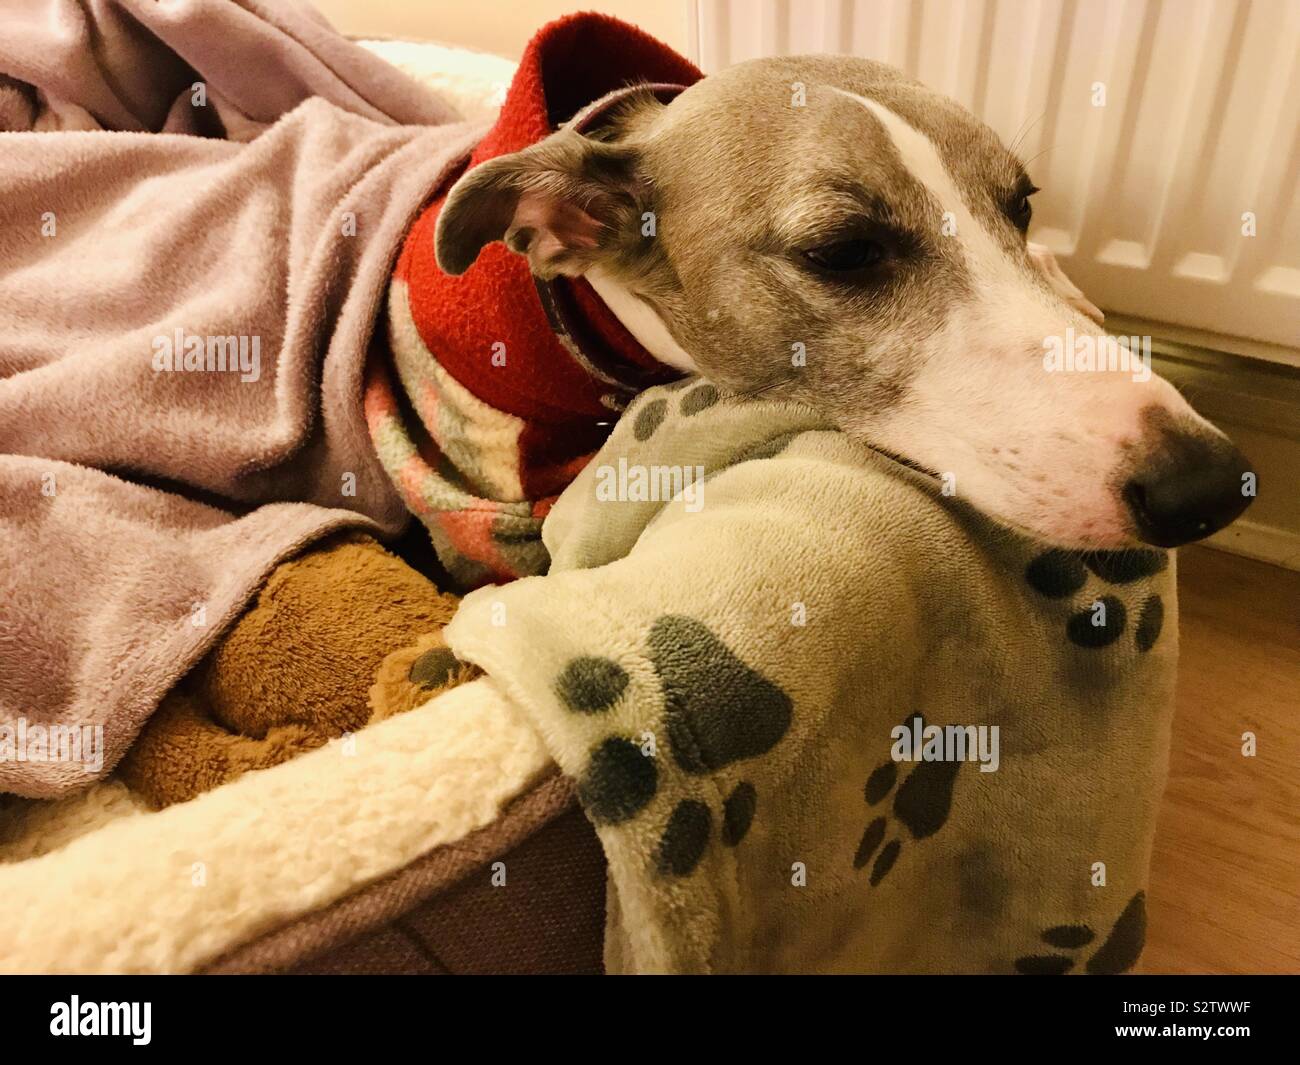 Whippet in dog bed with blankets Stock Photo - Alamy